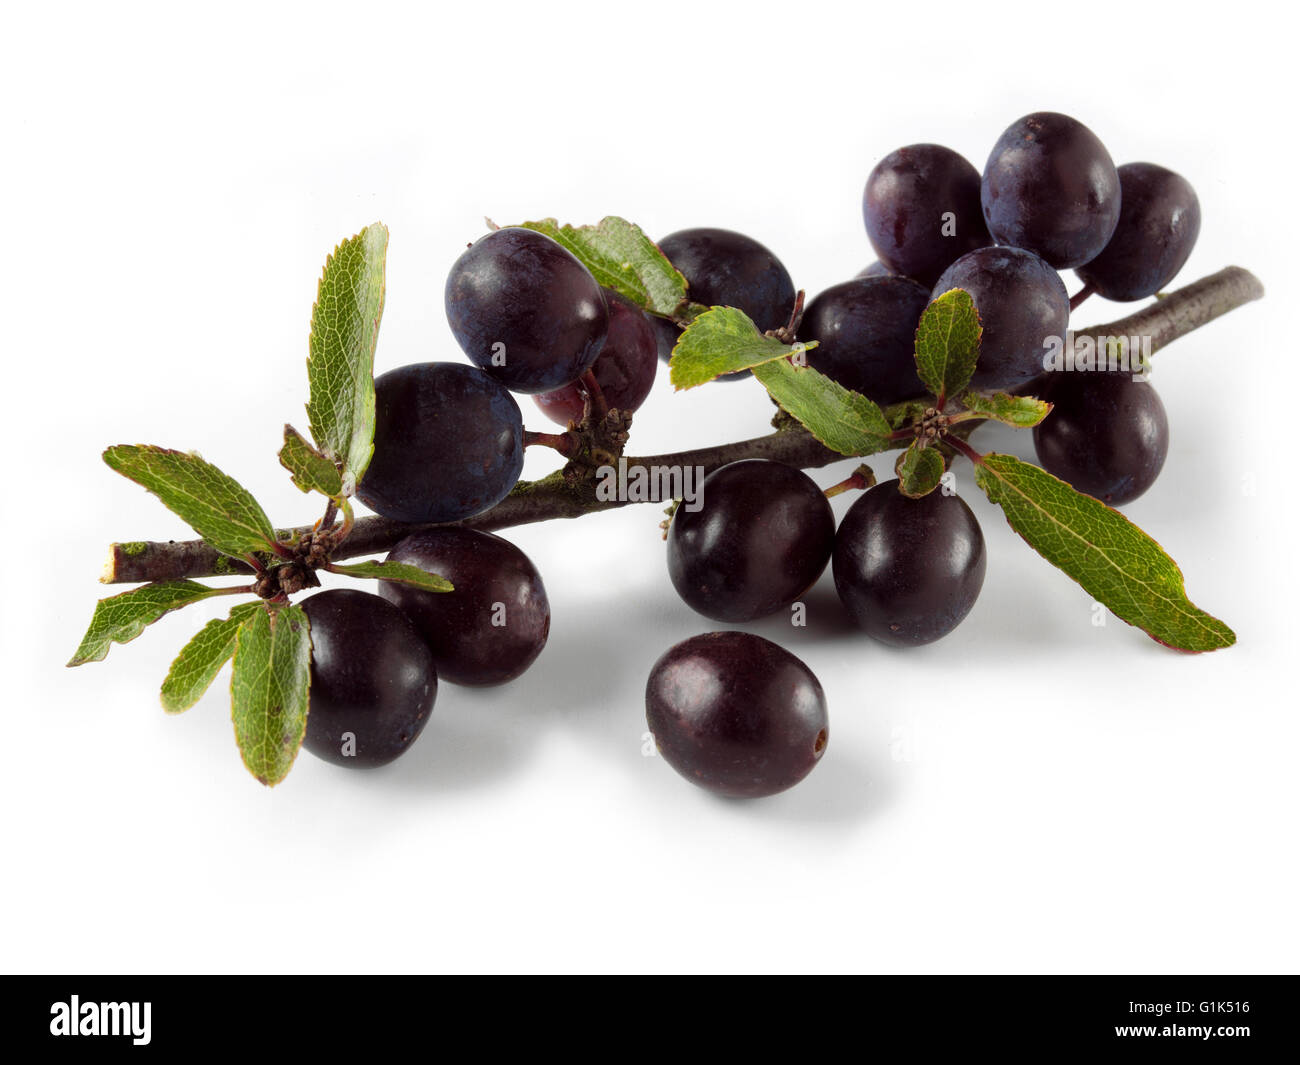 Close up of fresh sloe berries (Prunus spinosa) on a branch with leaves - white background cut out Stock Photo